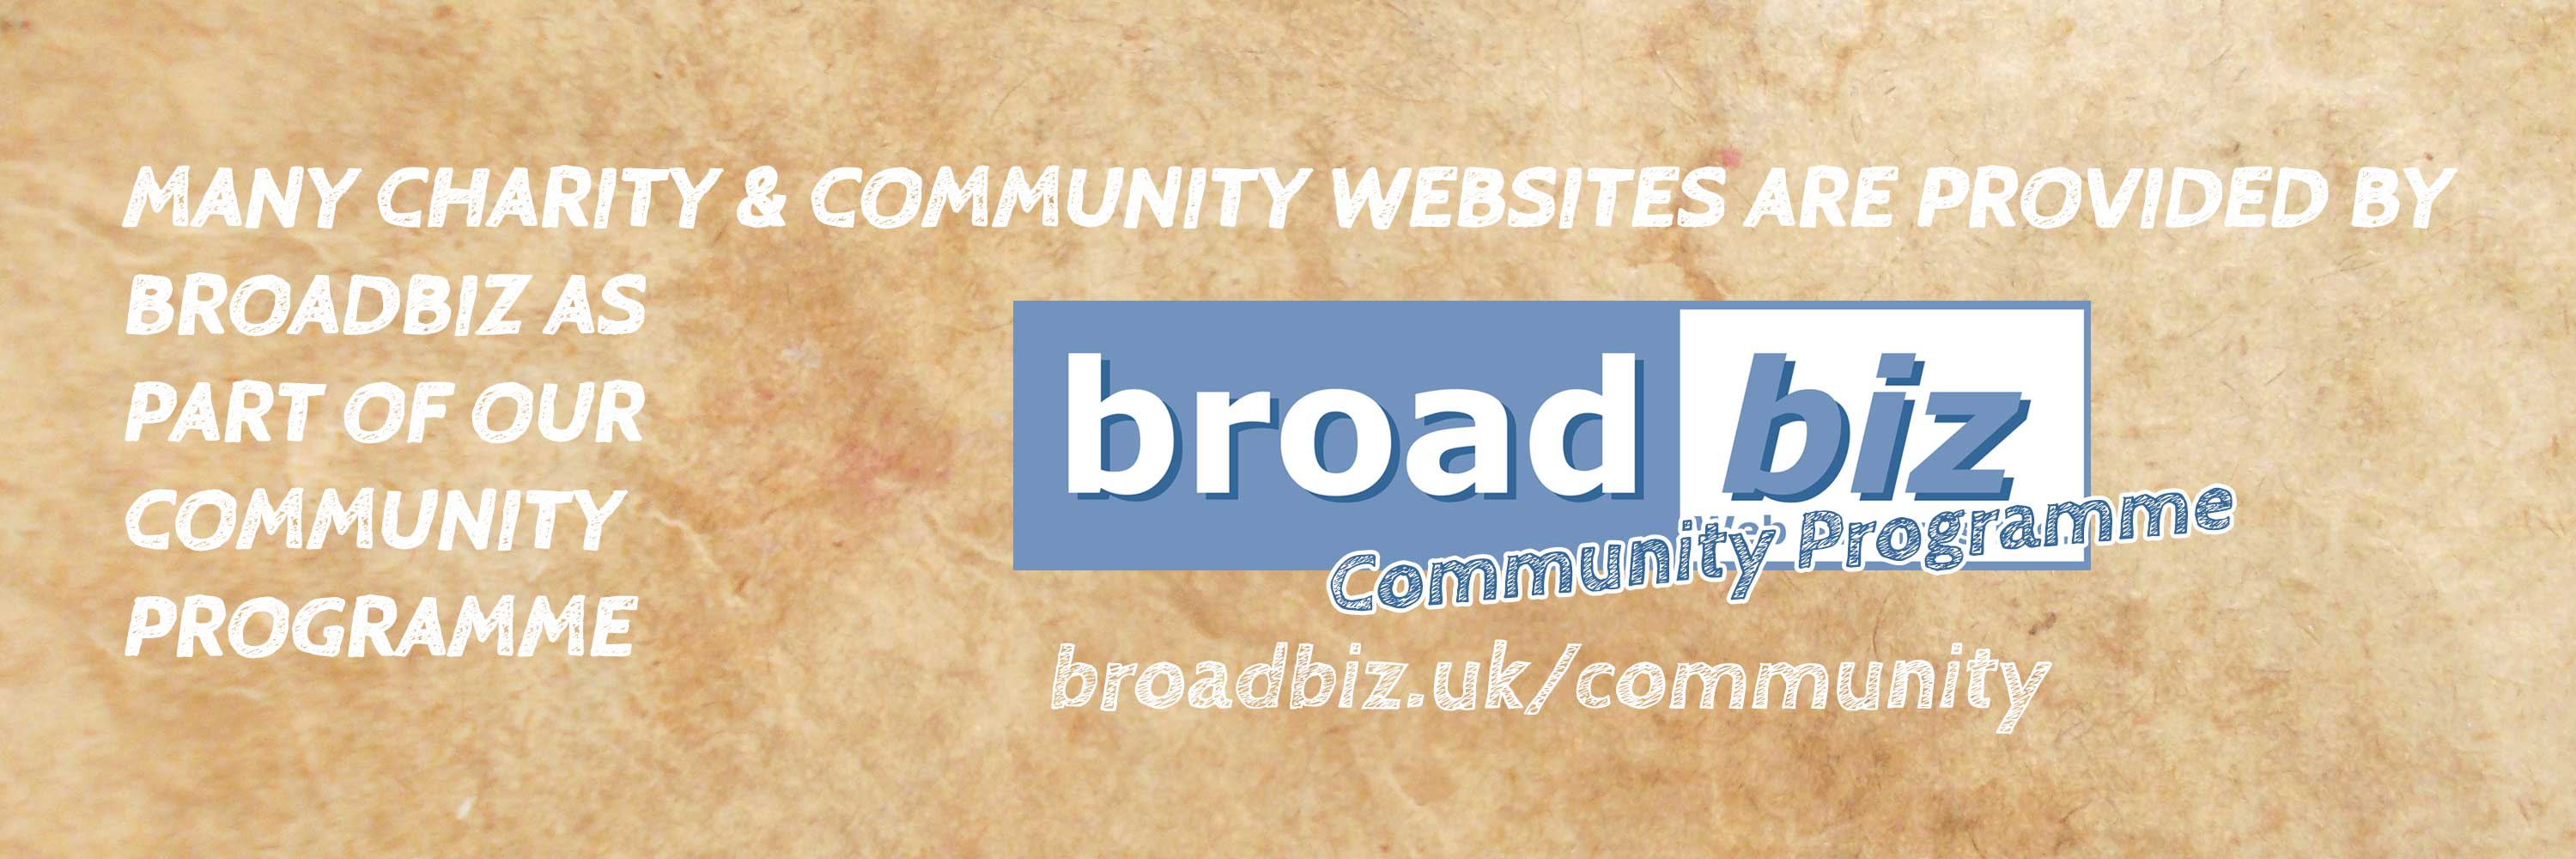 Many charity & community websites are is provided by Broadbiz as part of our Community Programme